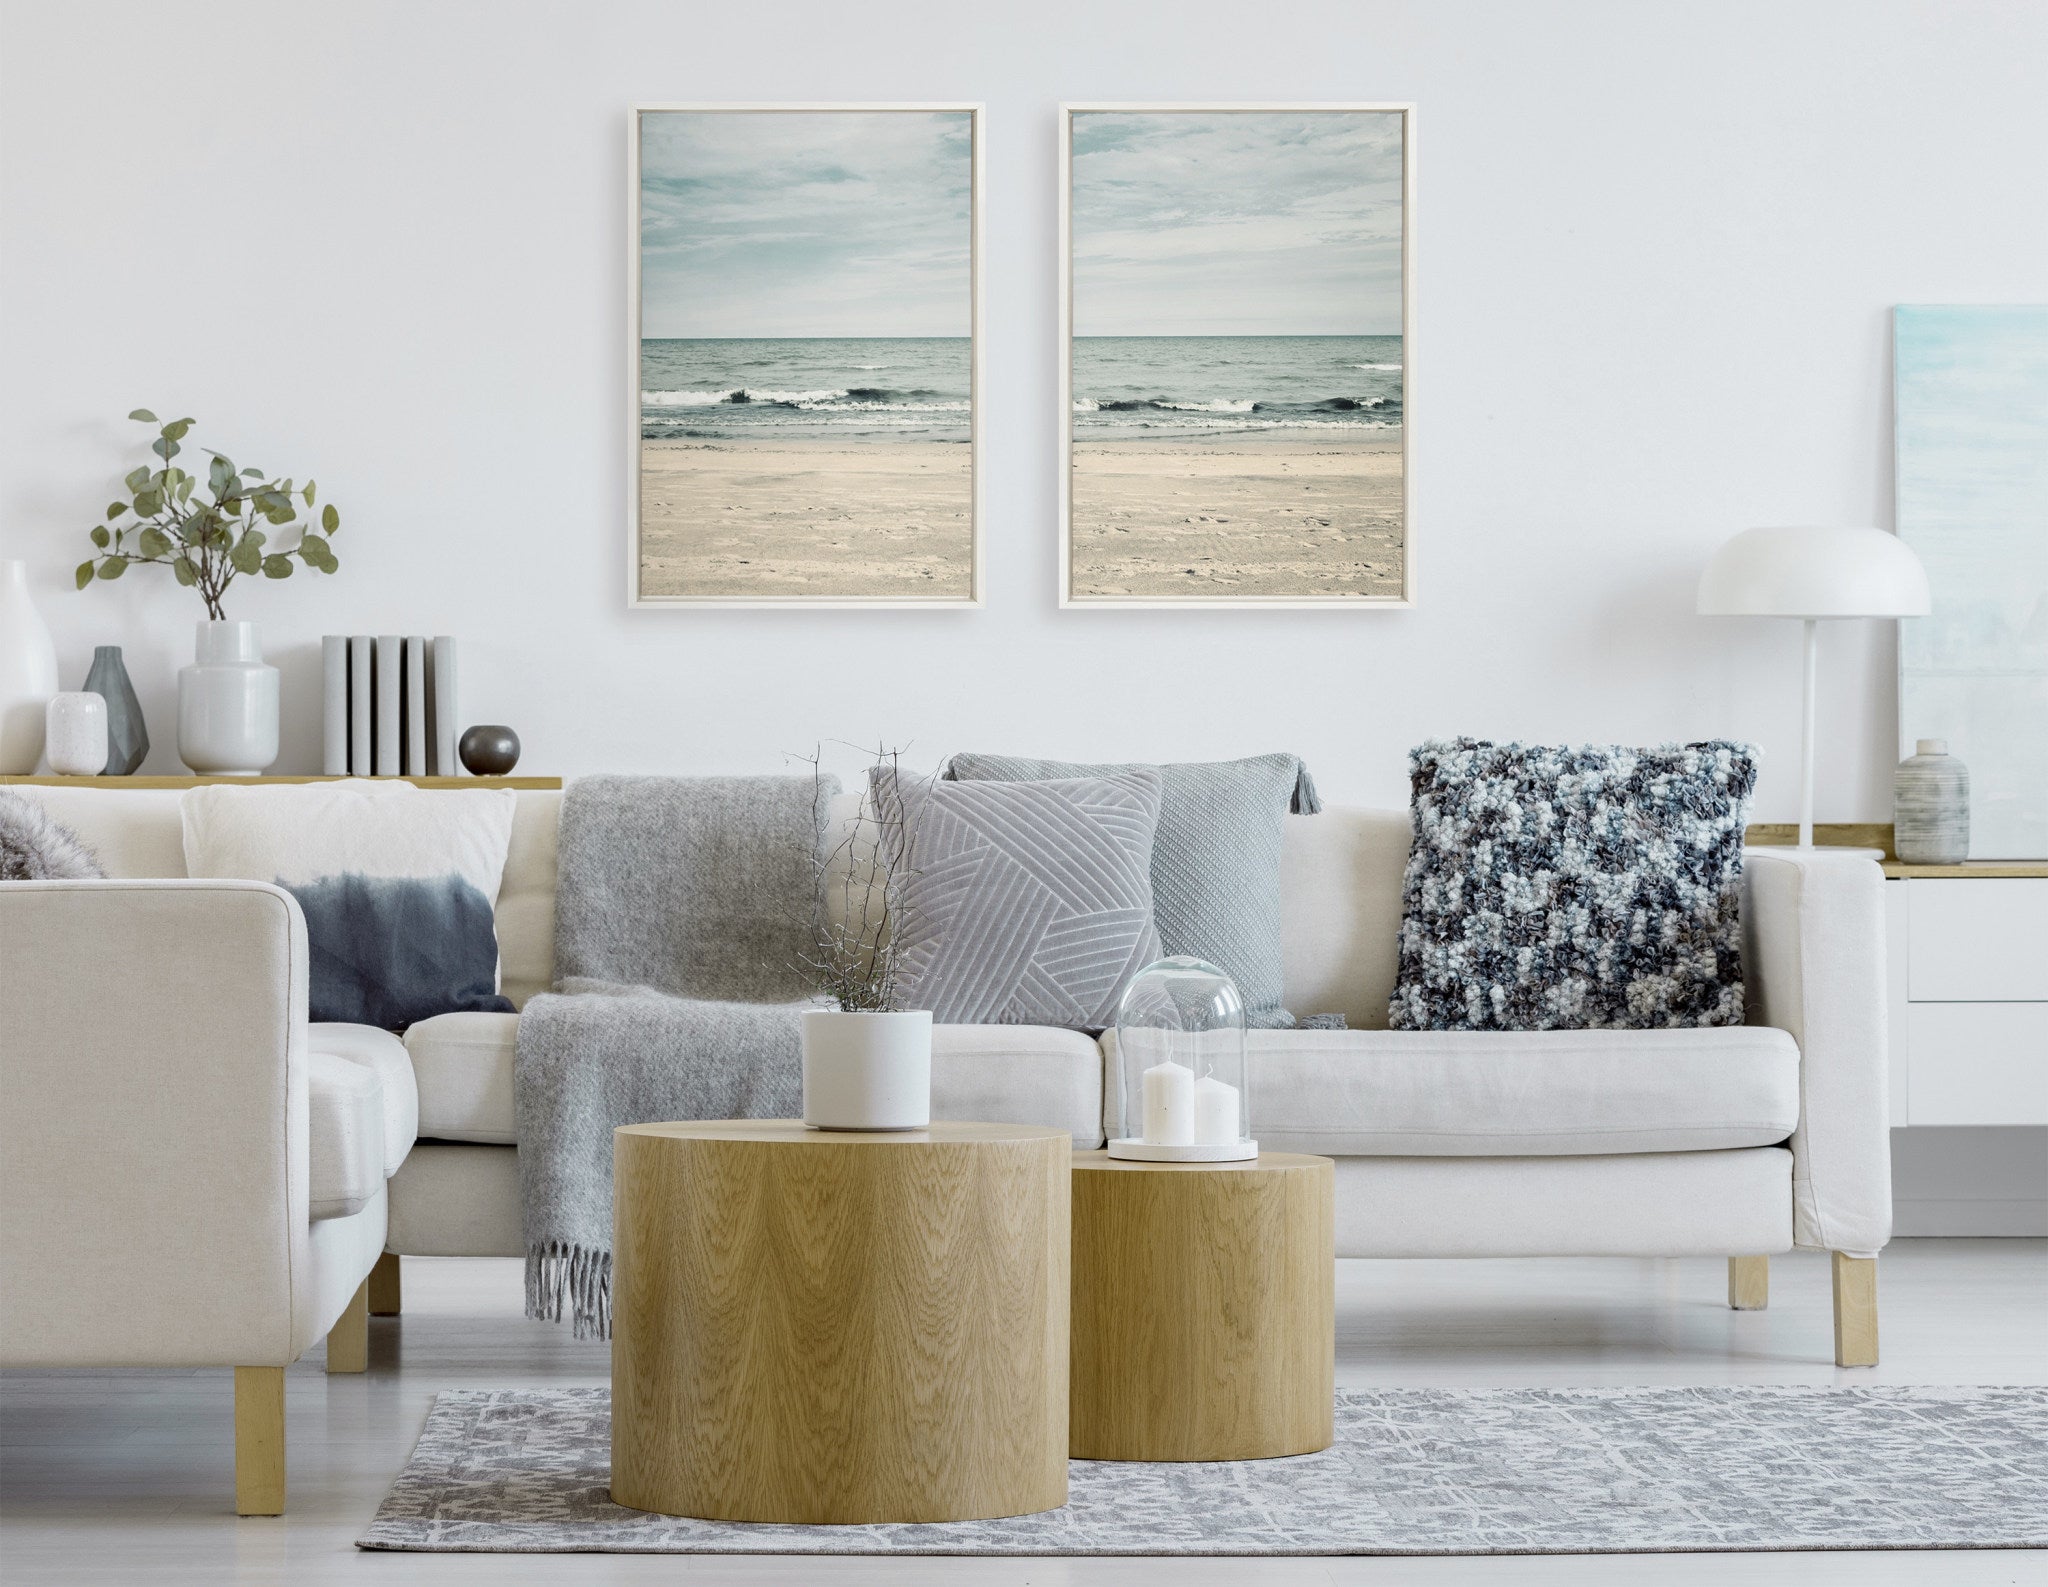 Sylvie Beach 2 Left and Right Framed Canvas by Emiko and Mark Franzen of F2Images